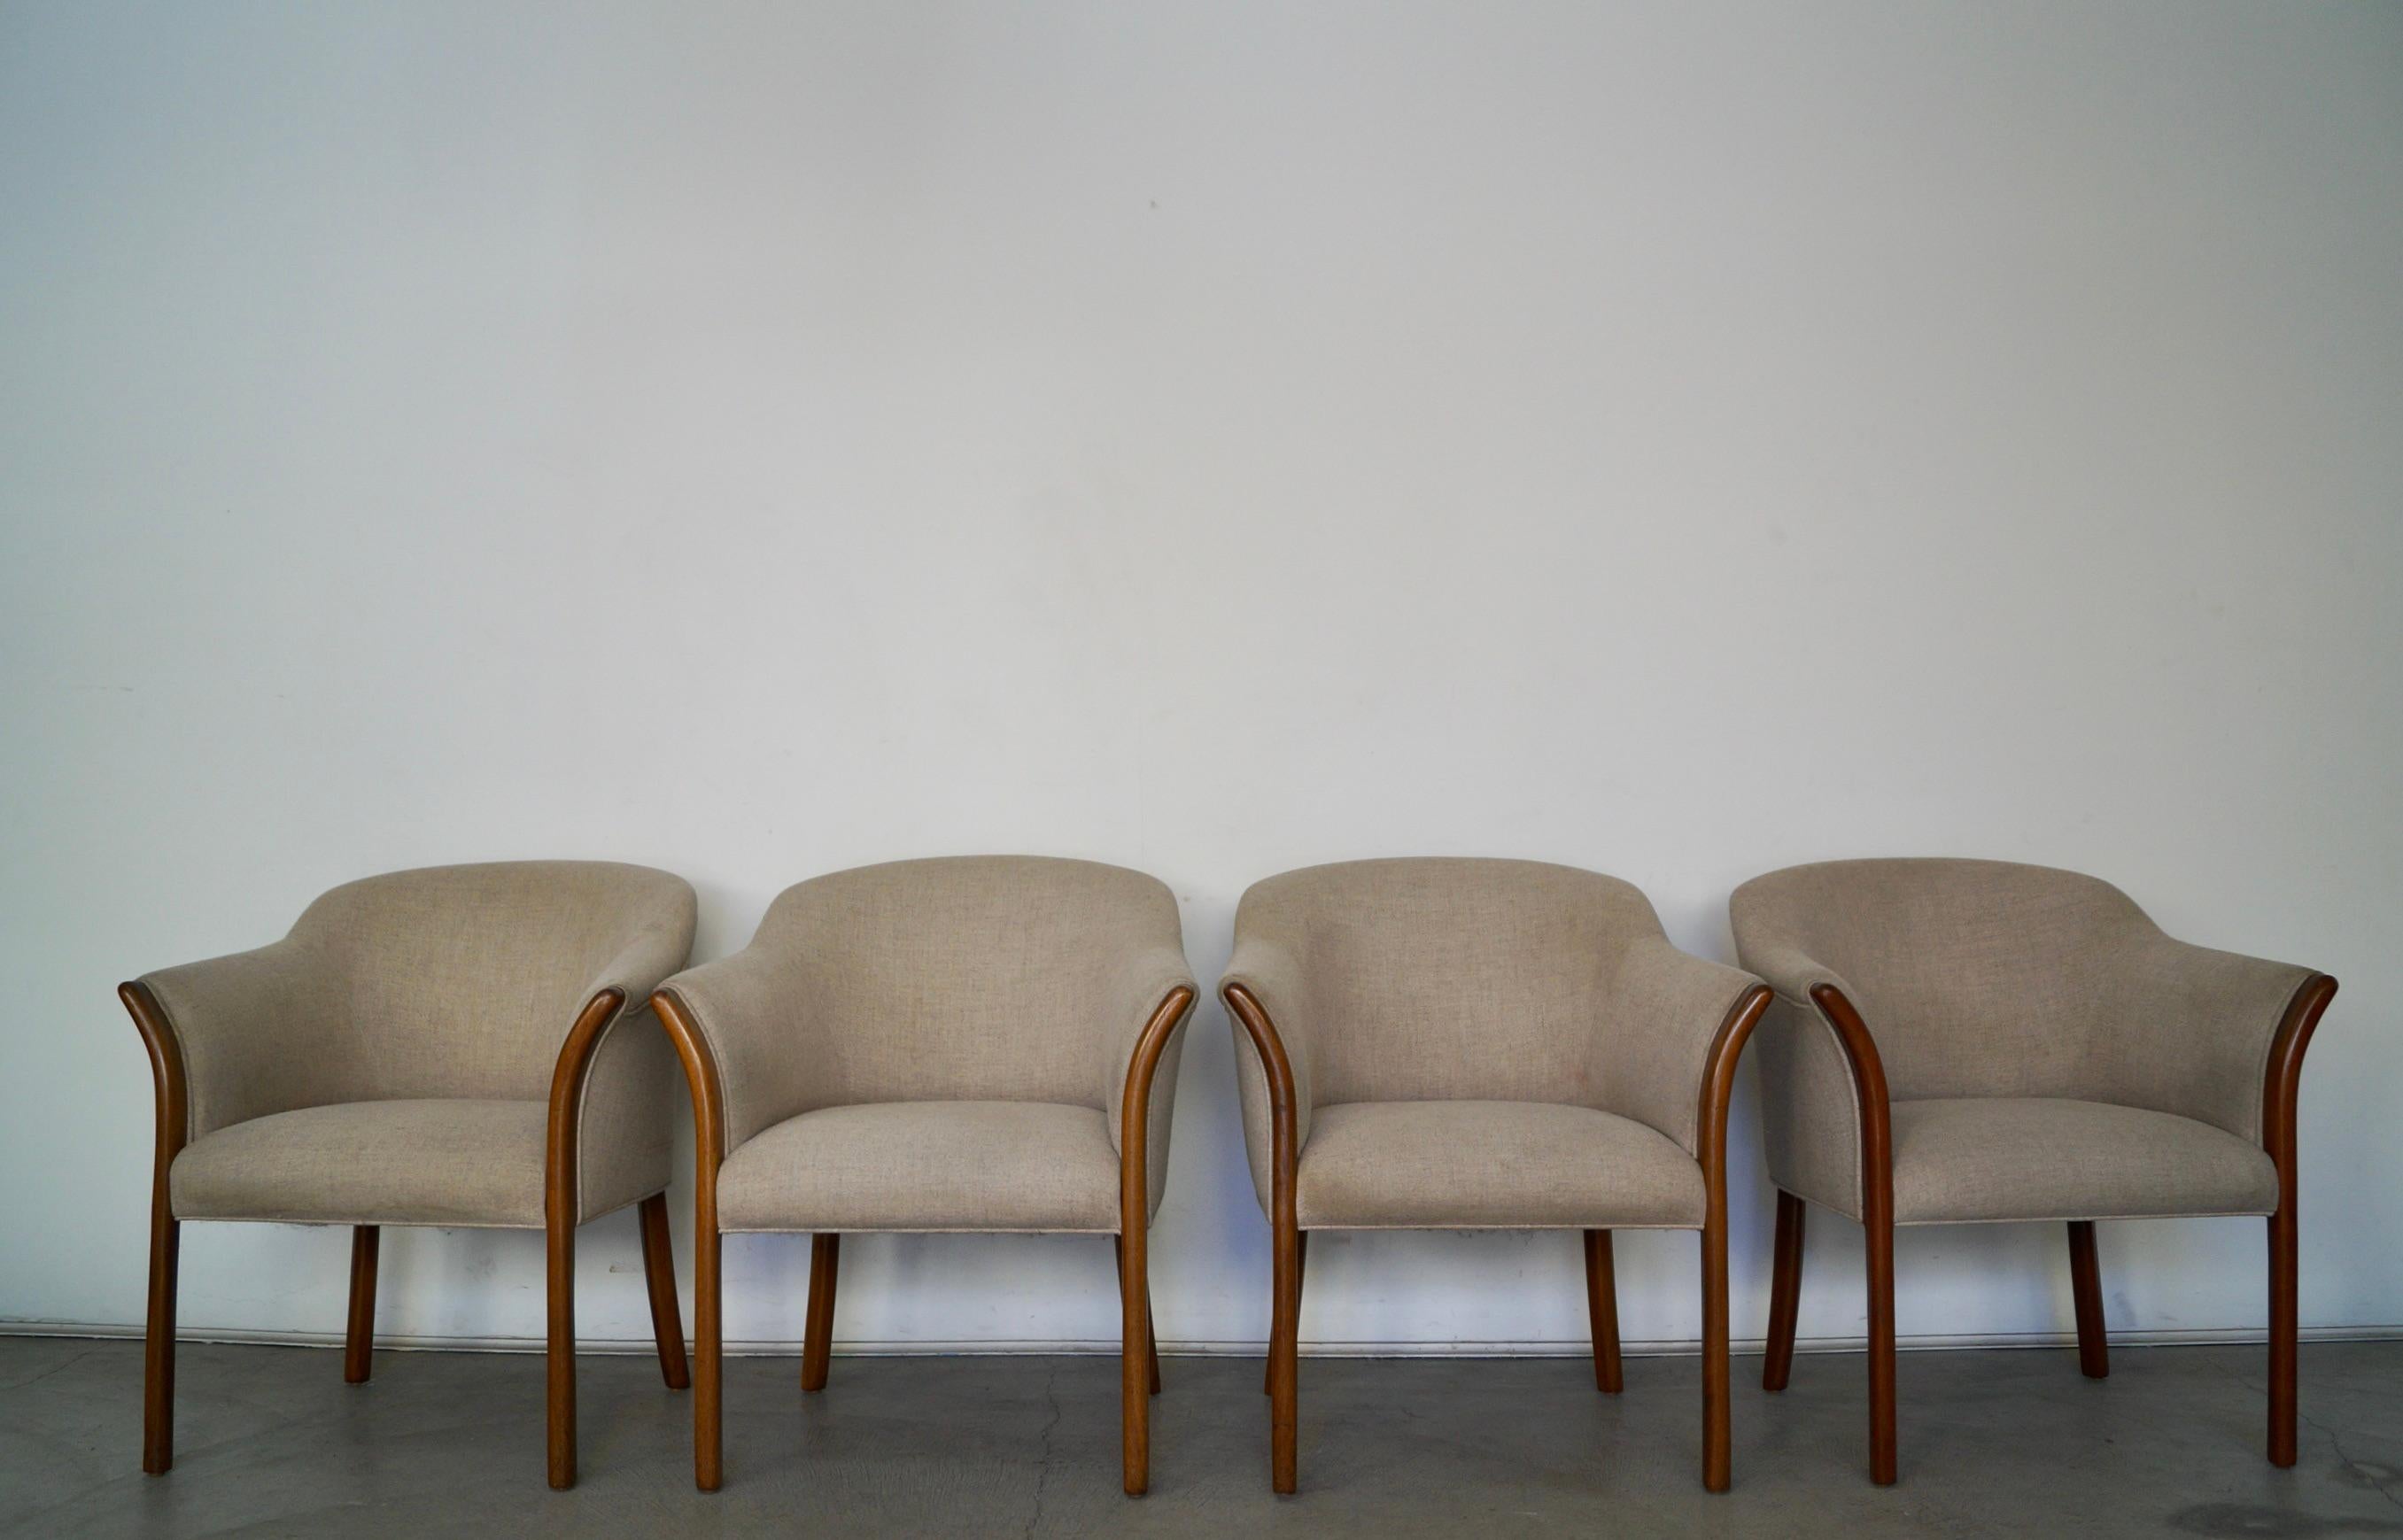 Vintage Post Modern armchairs for sale. Very beautiful design with solid walnut arms and legs. The arms have a nice design and are bent outwards. They have a barrel back shape, and have webbing in the seats. These chairs are really well made, and